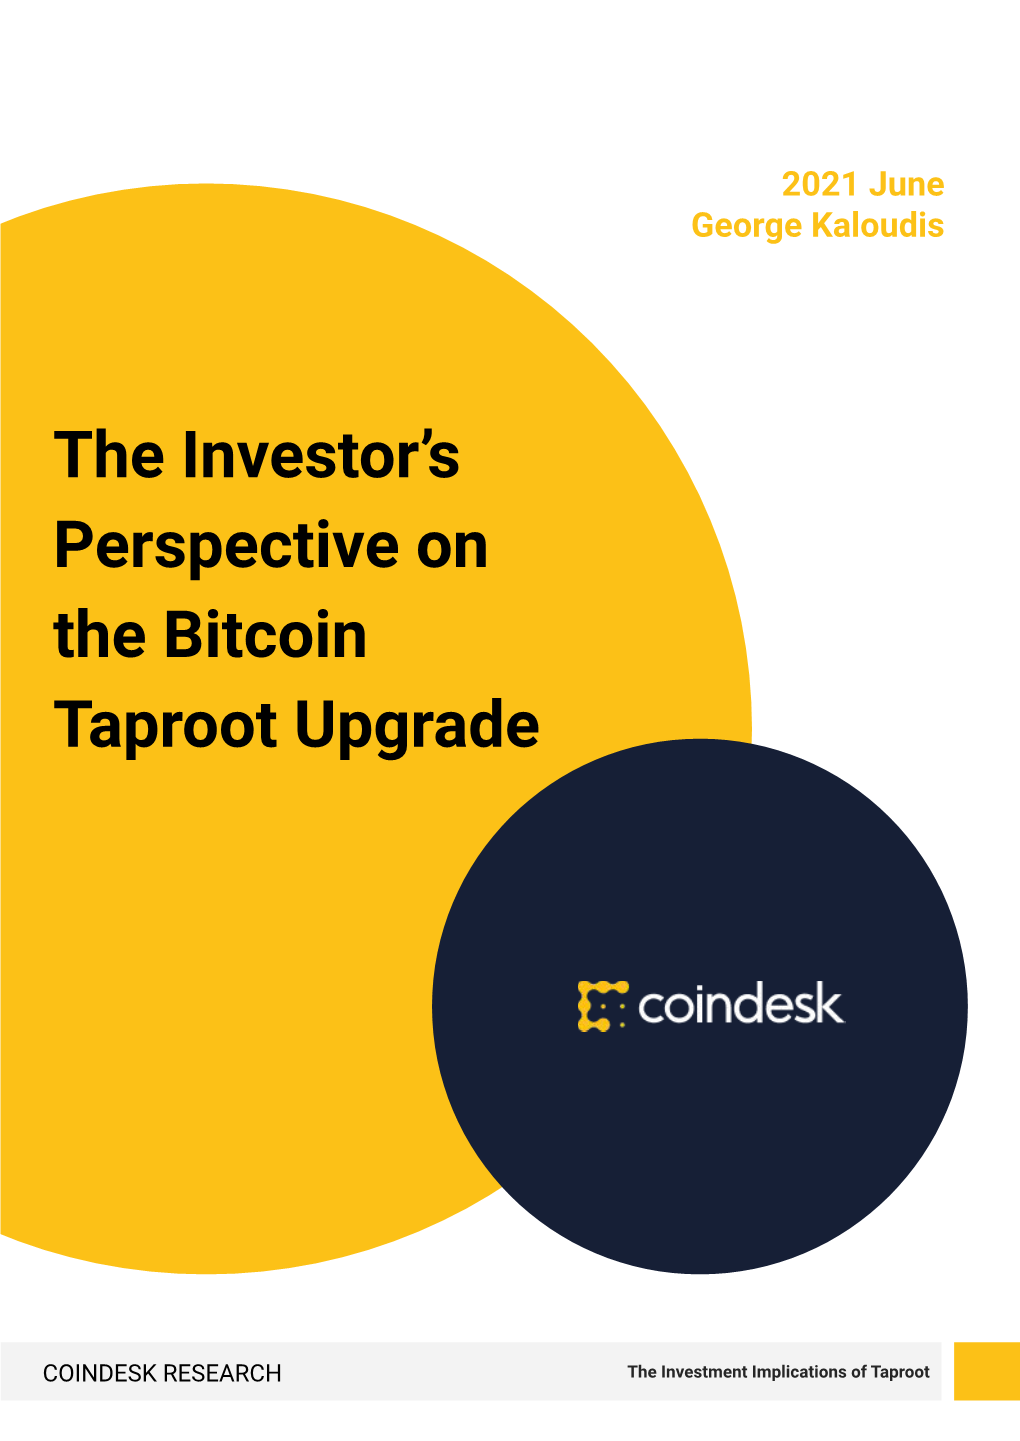 The Investor's Perspective on the Bitcoin Taproot Upgrade